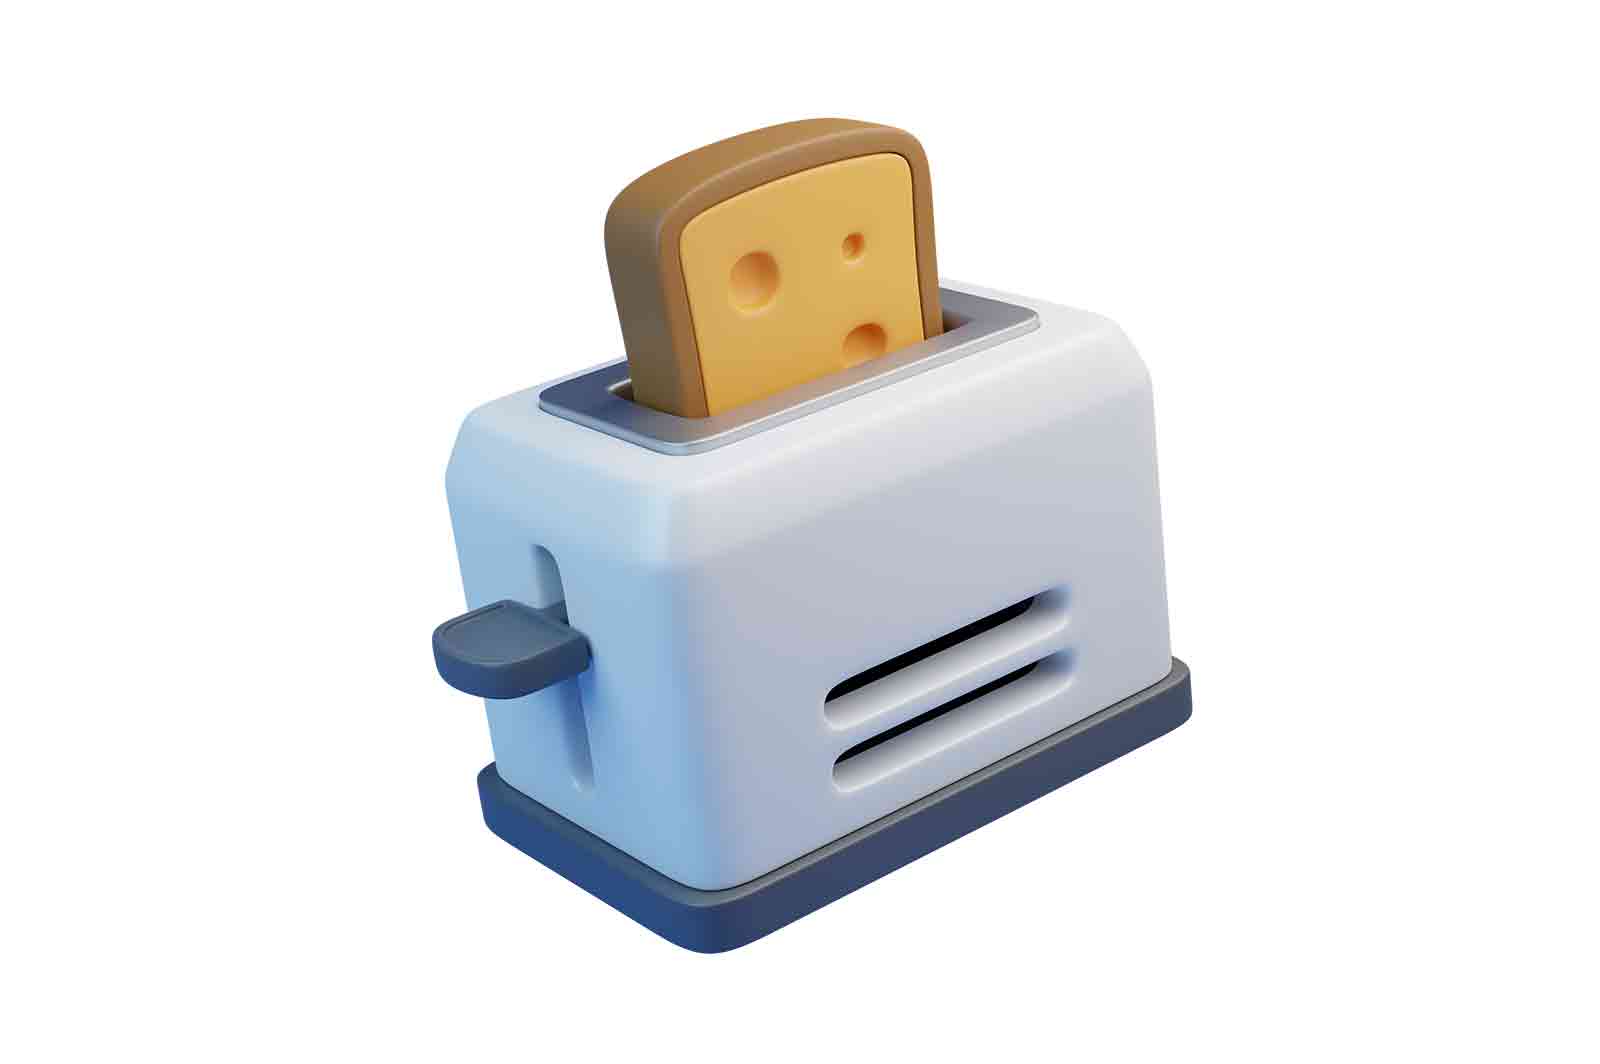 Toaster with toasted bread 3d rendered illustration. Electrical device for making toasts. Kitchen appliances for cooking